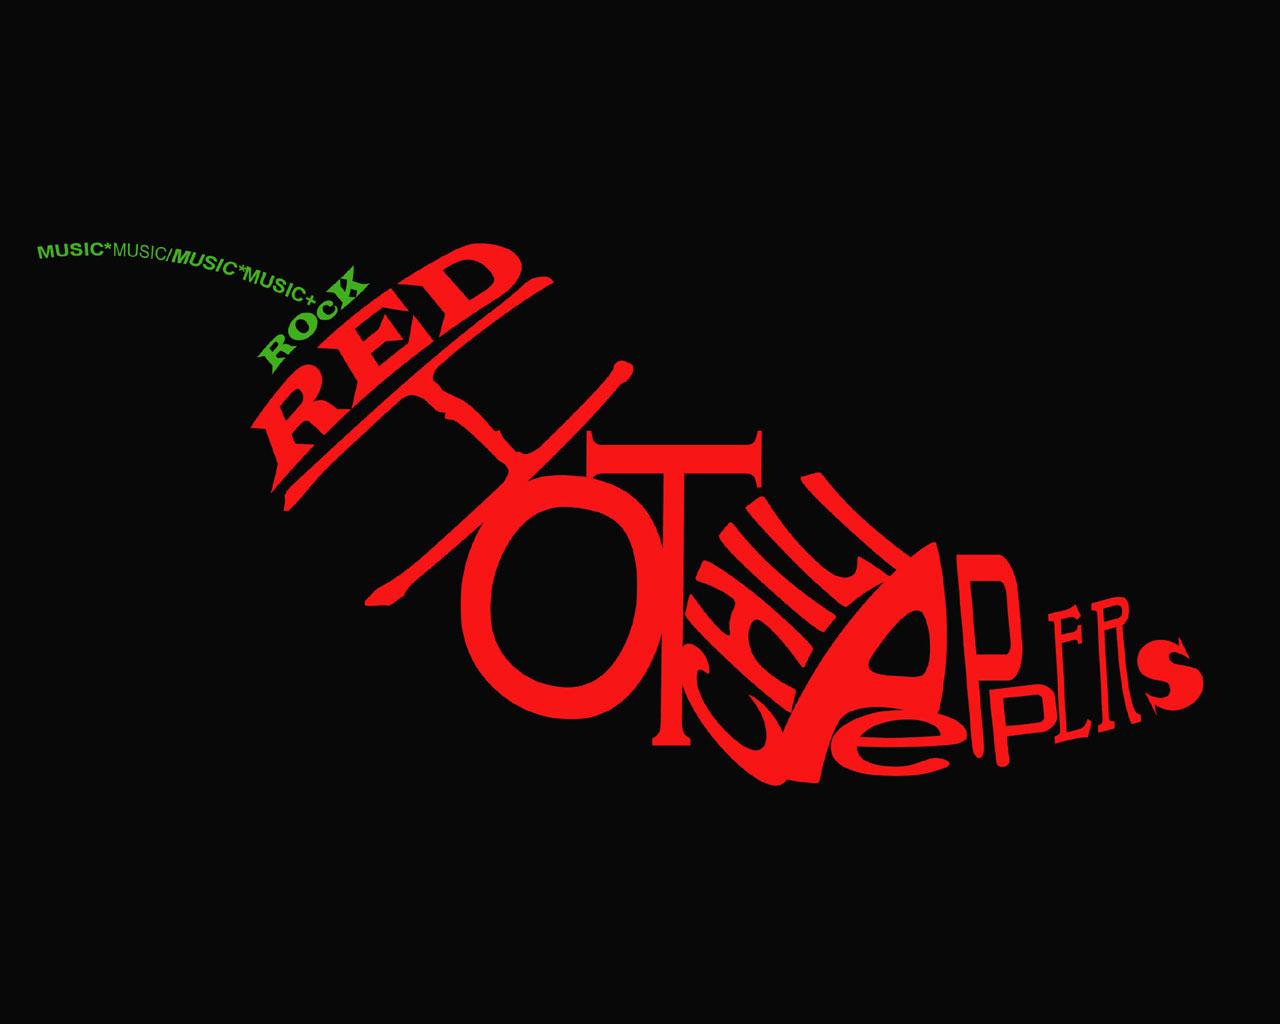 Red Hot Chilli Peppers Wallpaper #4 1280 x 1024 